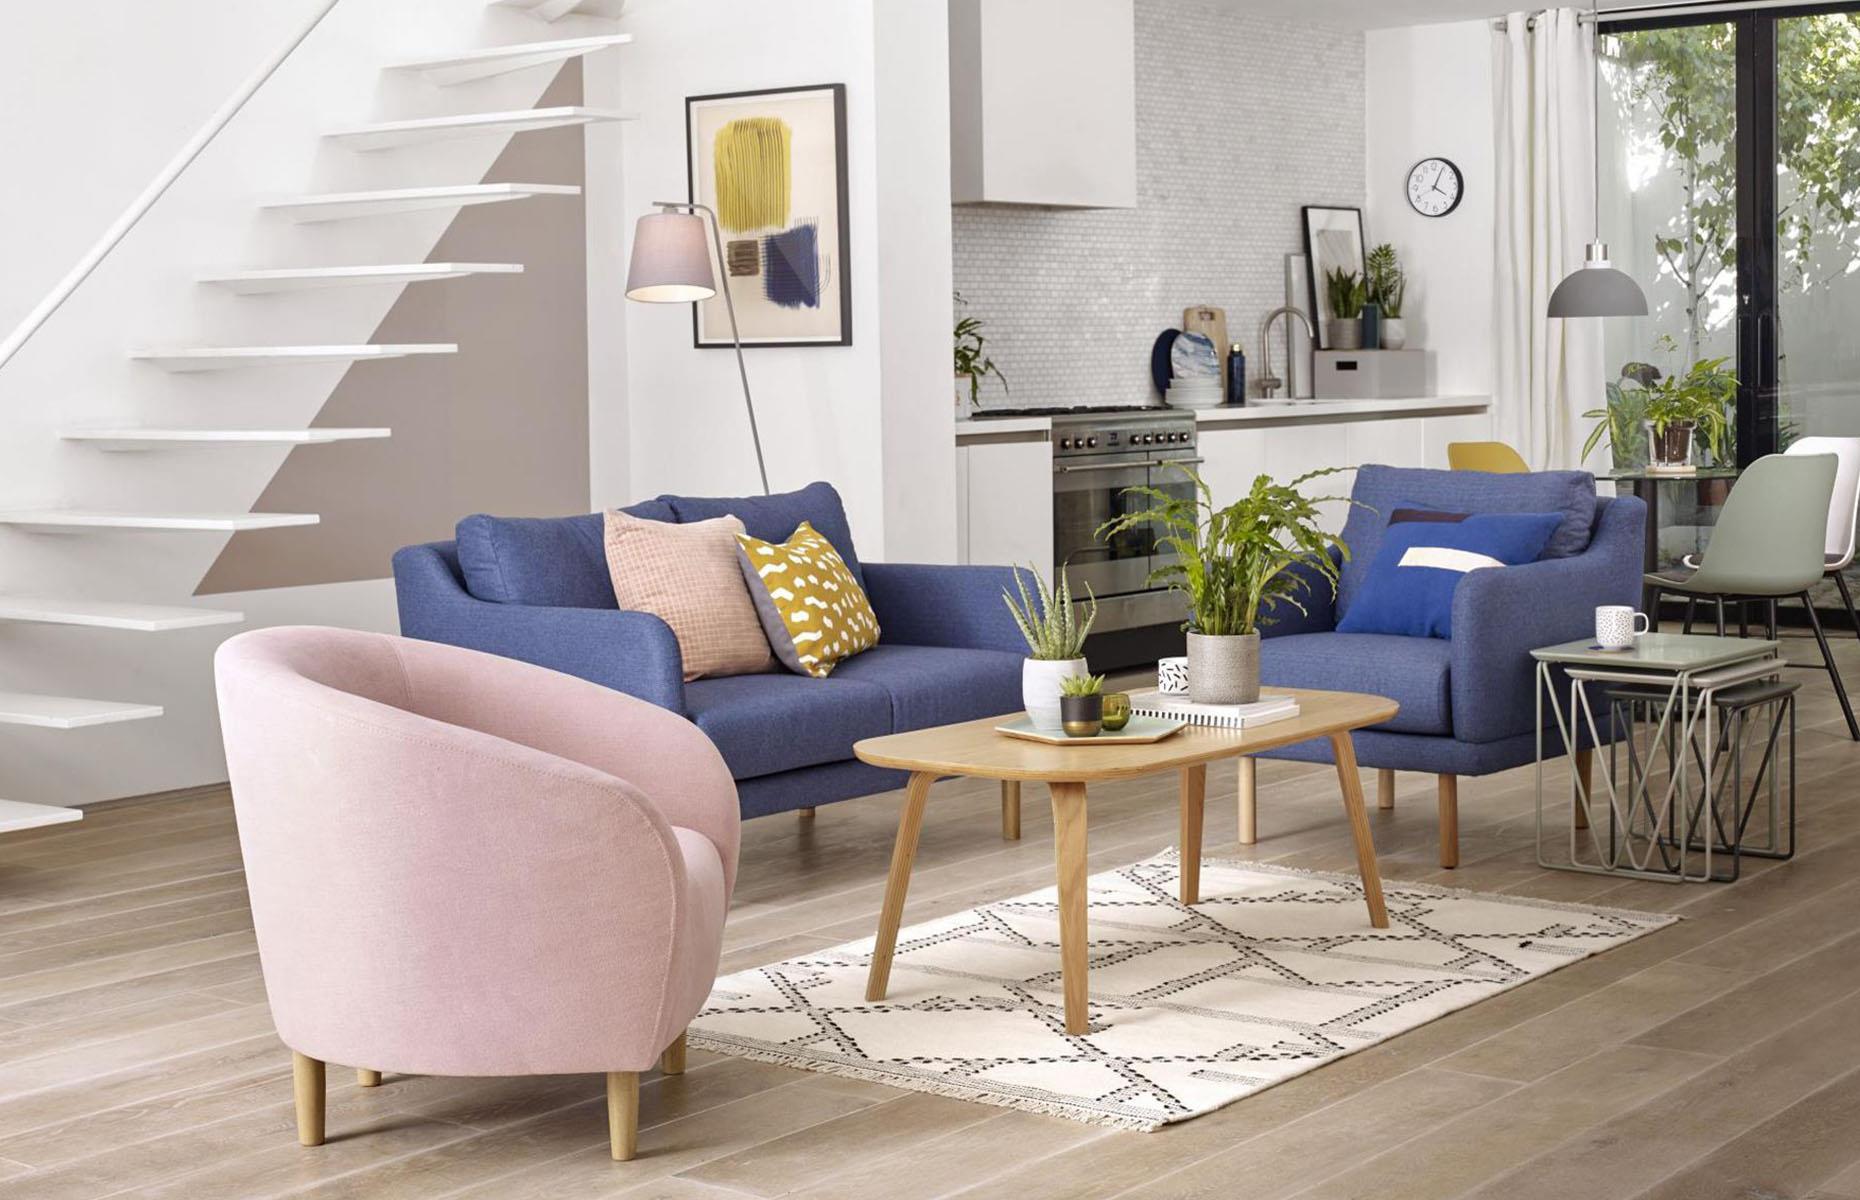 <p>If you want to create a distinction between your living zones without ending up with a jarring, disconnected scheme, decorate each individual area with different hues. Here, deep blue and powder pink armchairs define this sitting area, while pale sage accents dominate the kitchen. Pops of yellow create a cohesive link between the two spaces.</p>